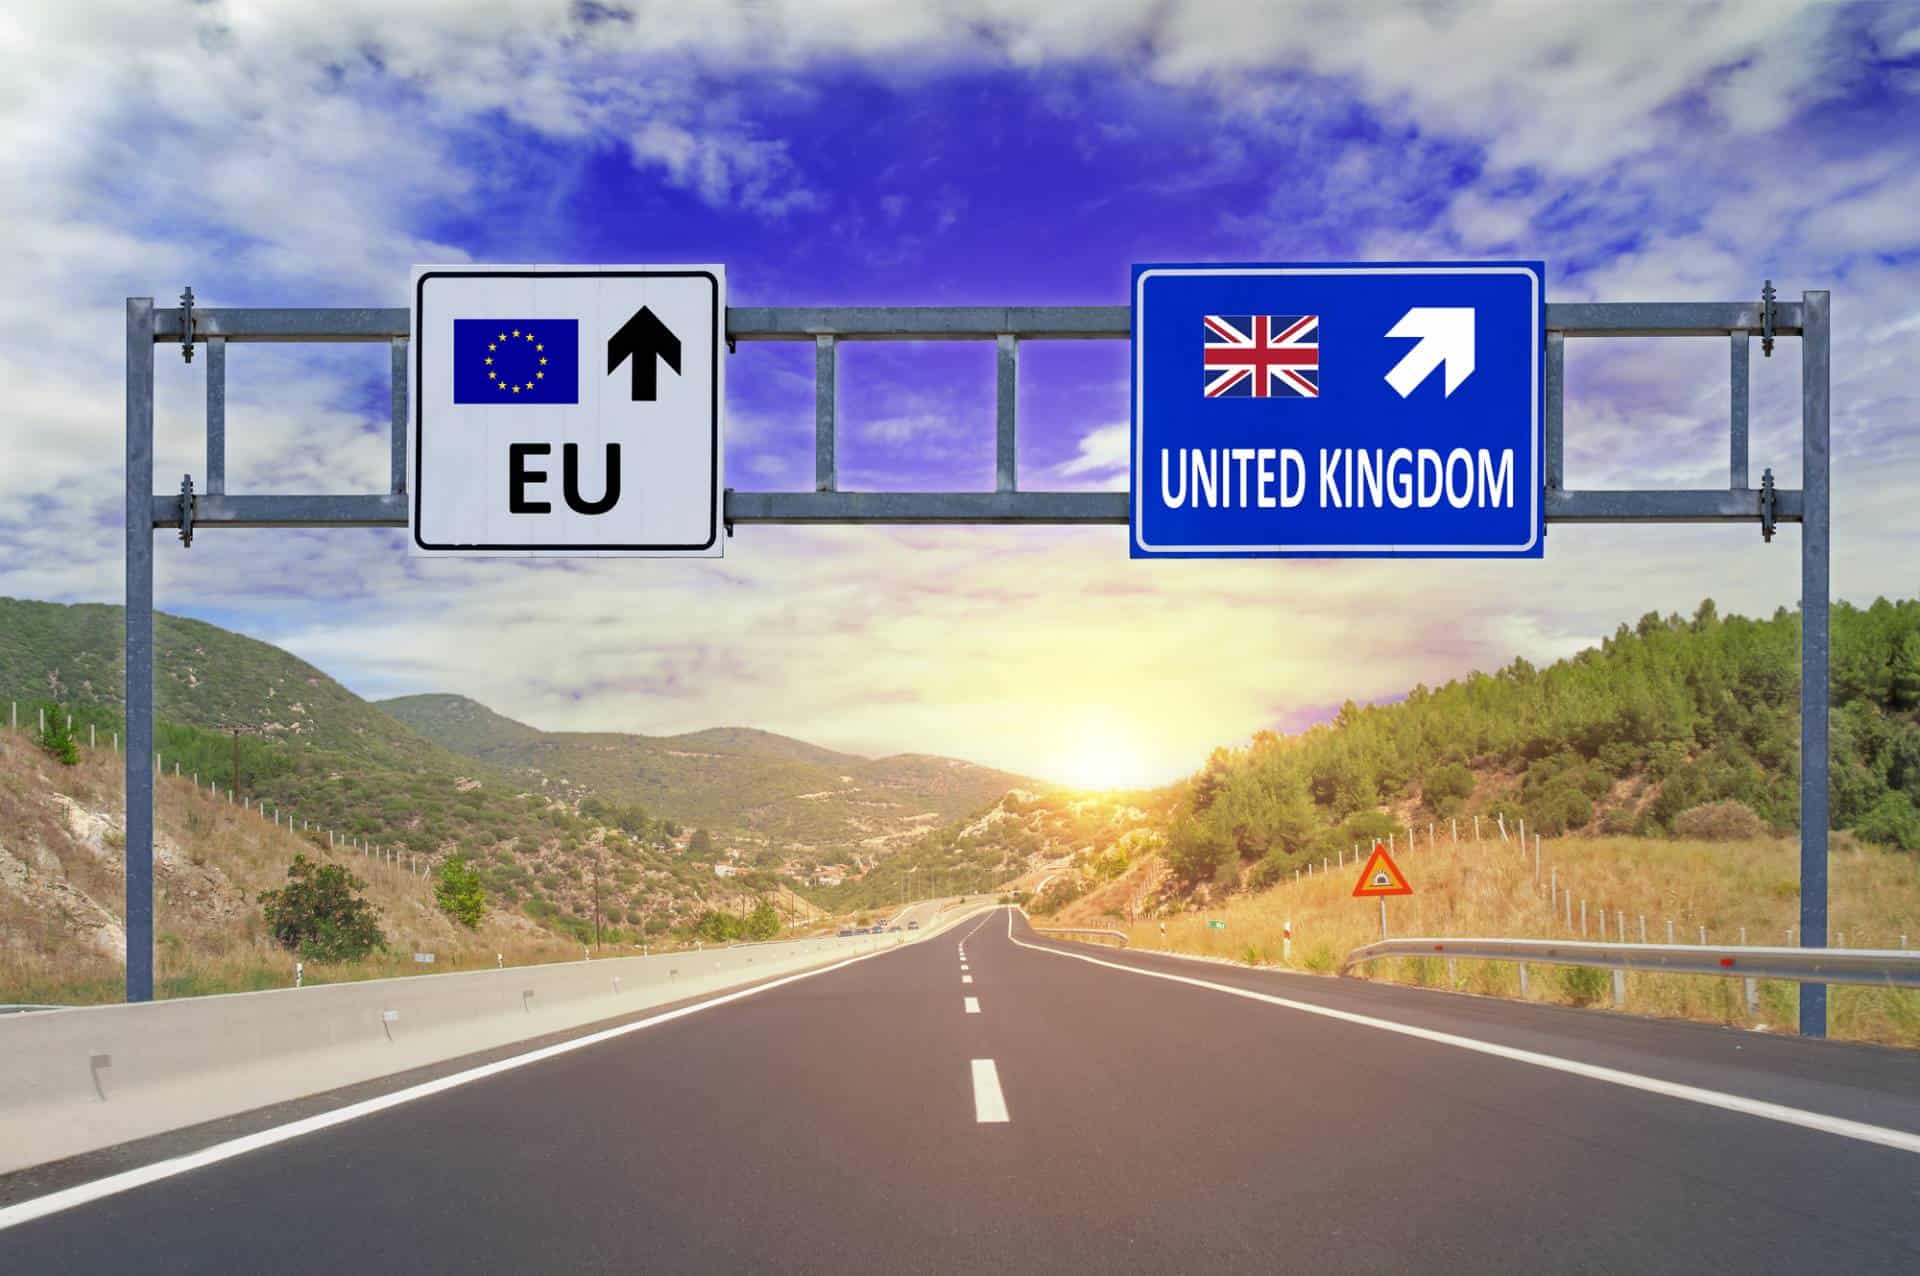 Two options - EU and the United Kingdom on road signs on highway